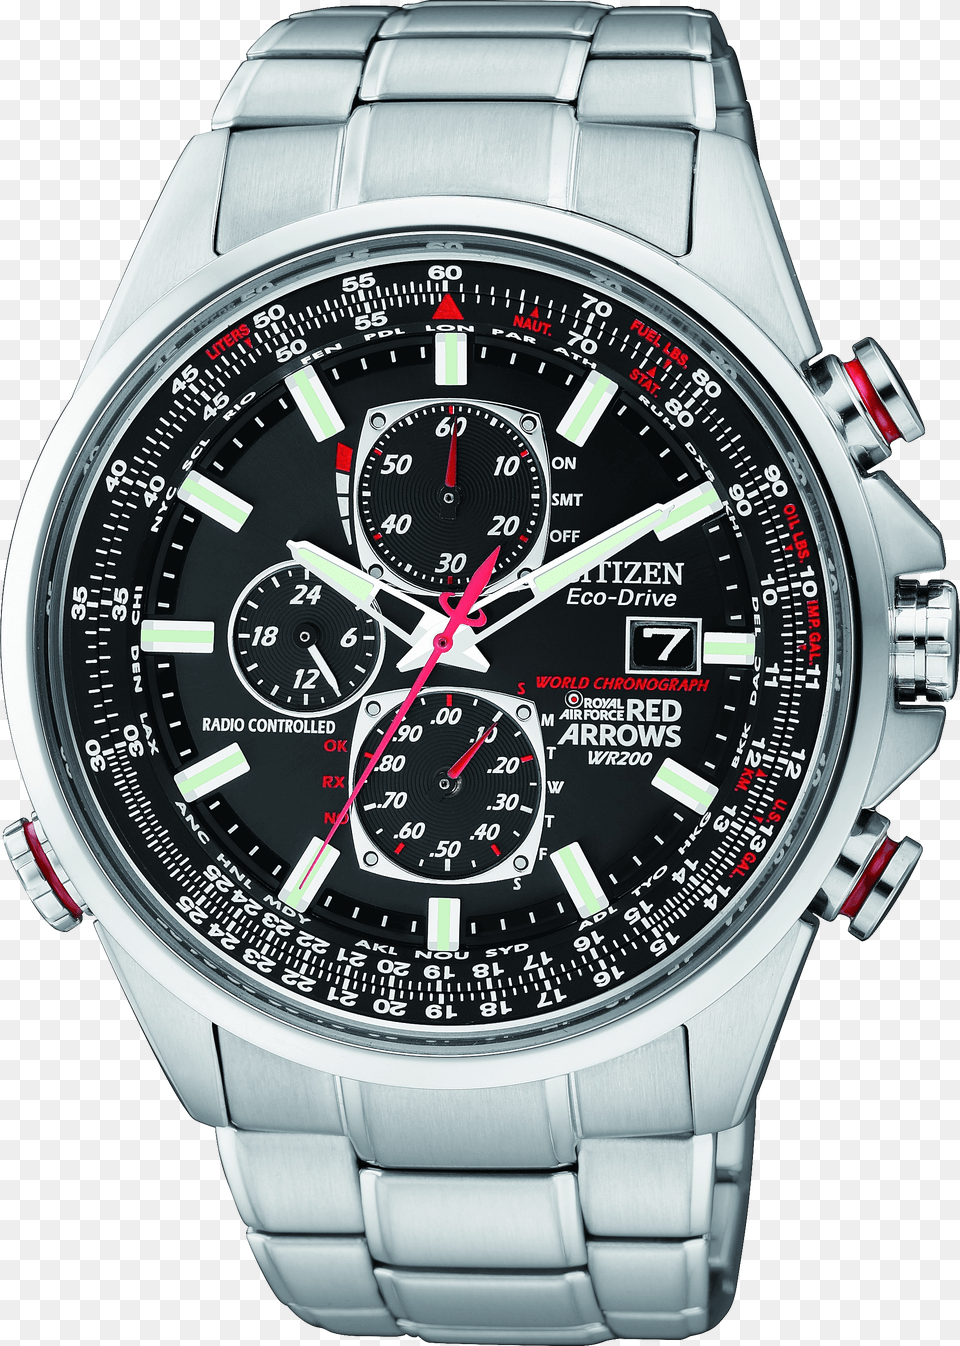 Wrist Band Watch Image Citizen Red Arrows World Chronograph At Eco Drive Png